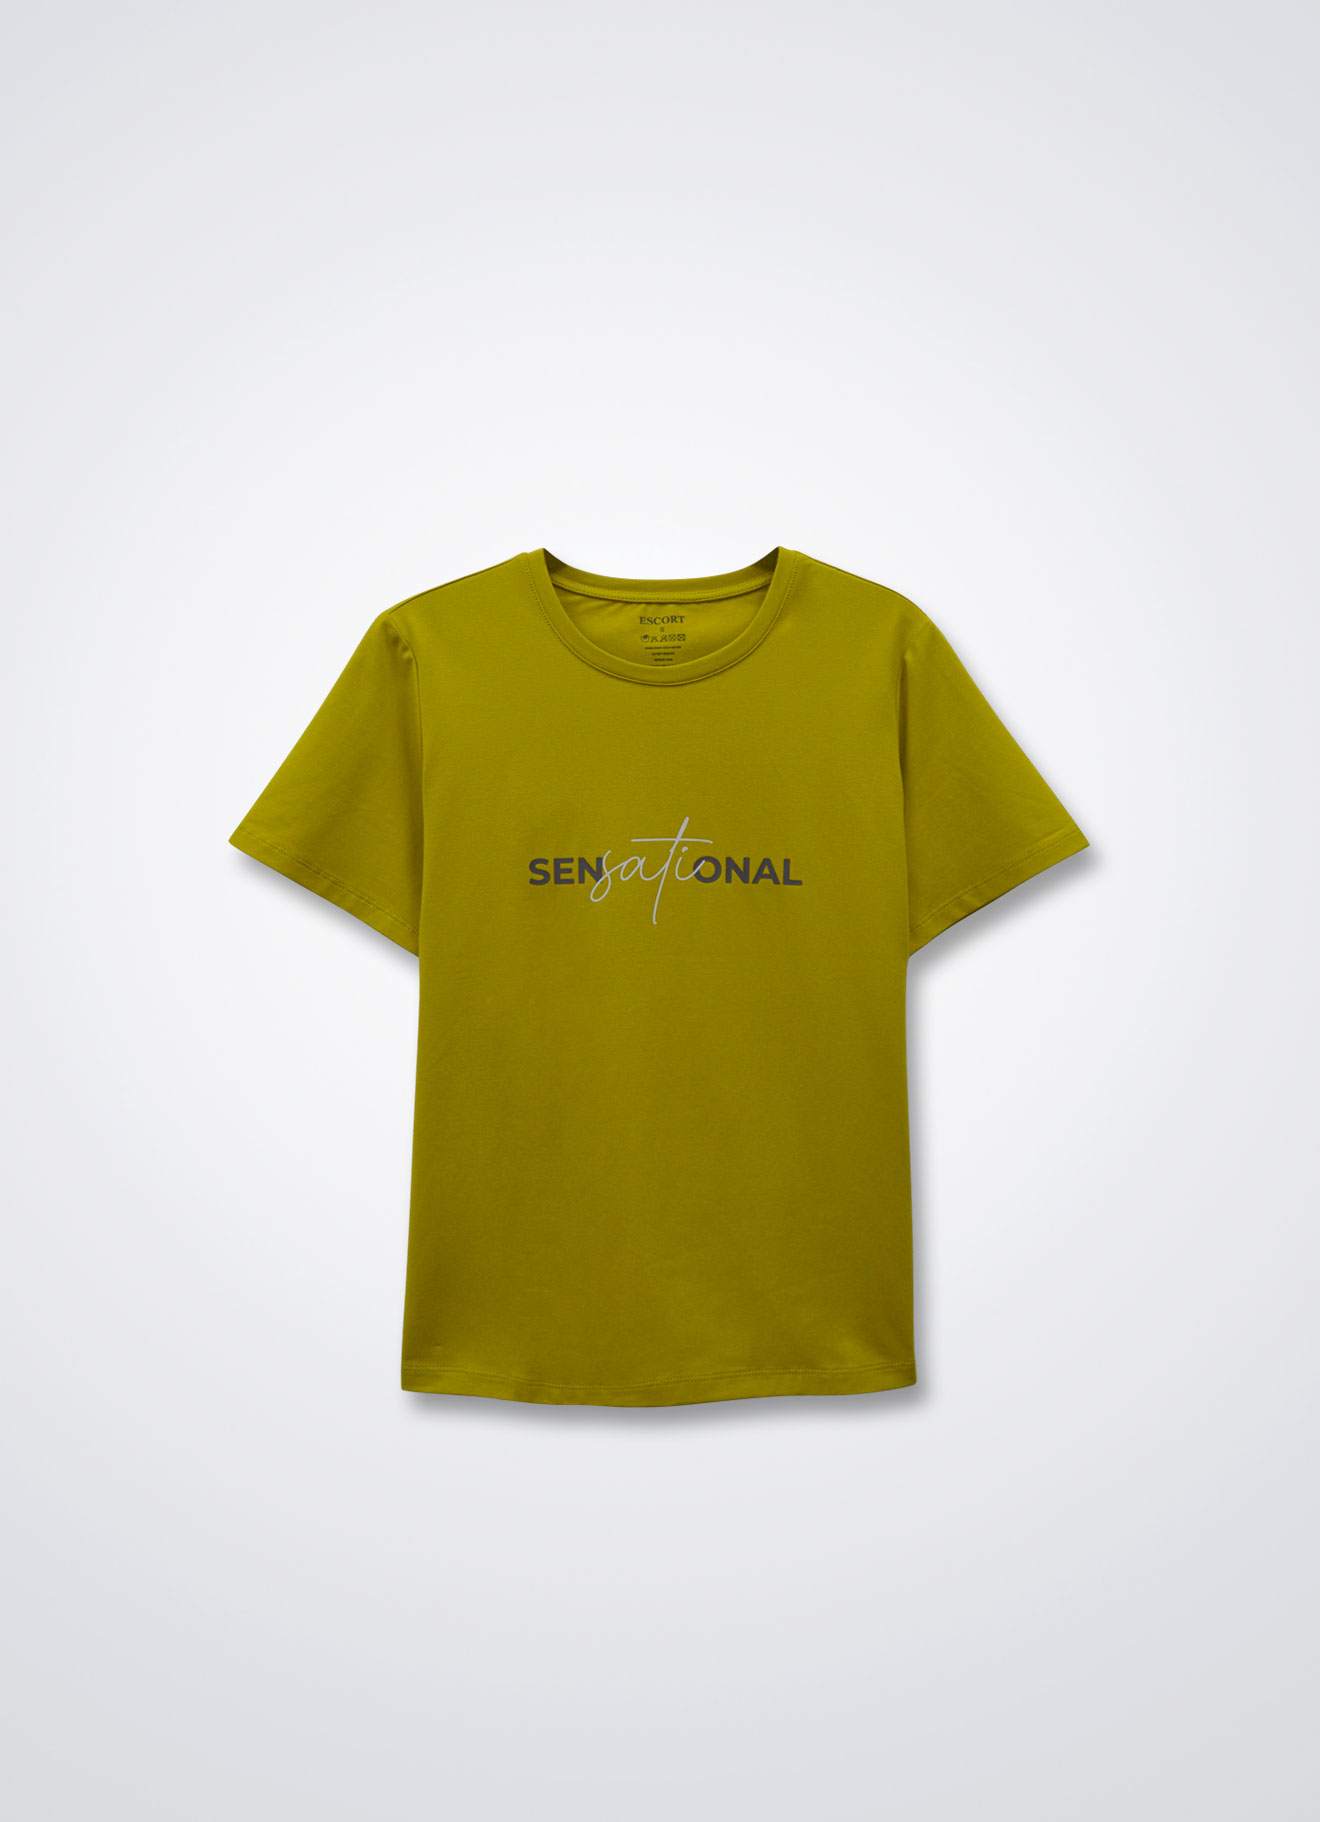 Lemon-Curry by Printed Top